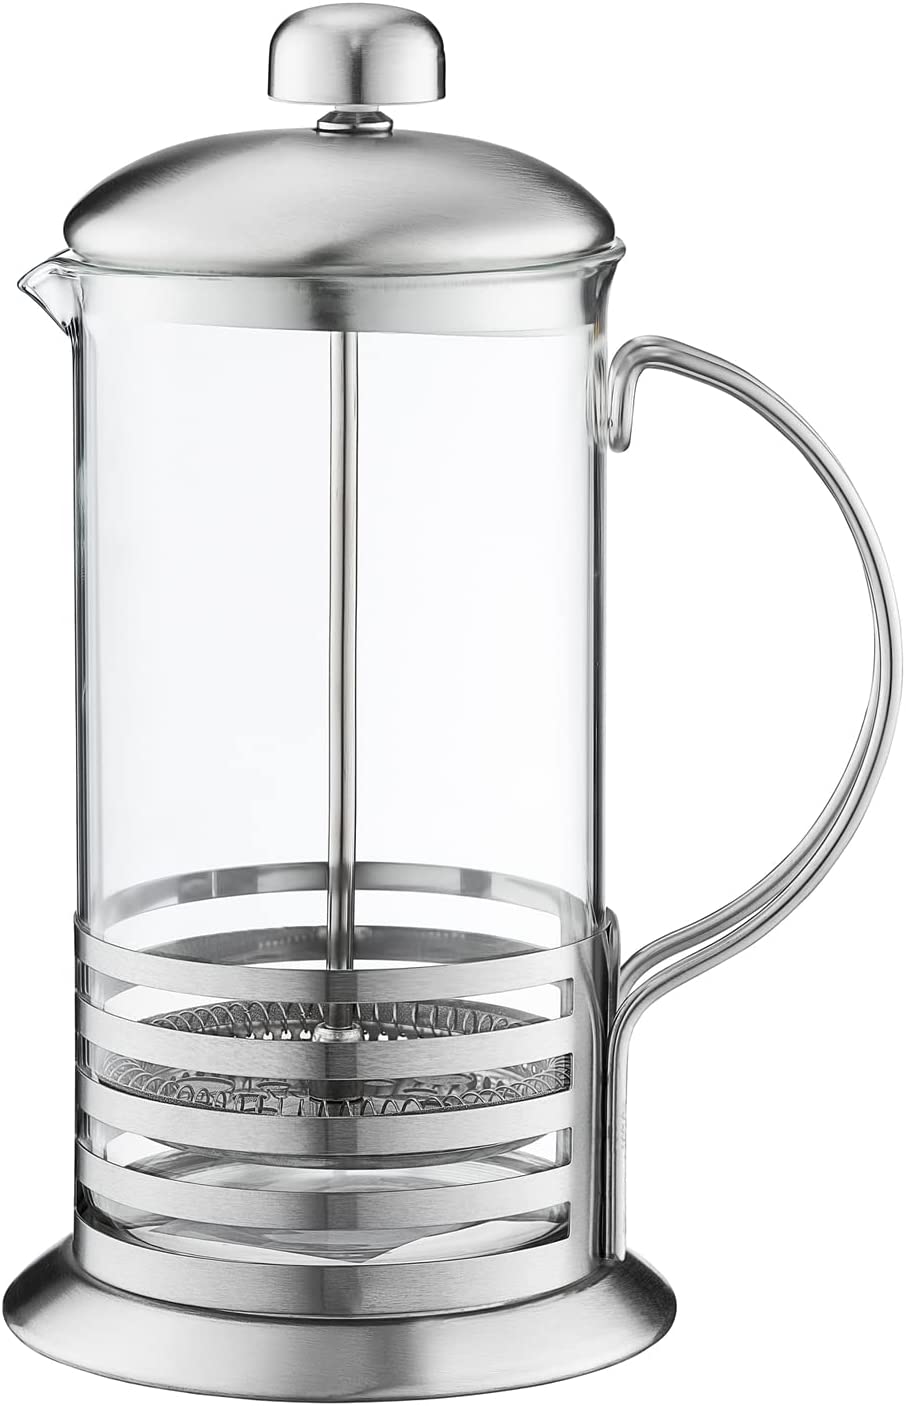 Ambition French Press Small 1 Cup Coffee Maker Glass Stainless Steel Filter Steel Frame With Handle Stripes